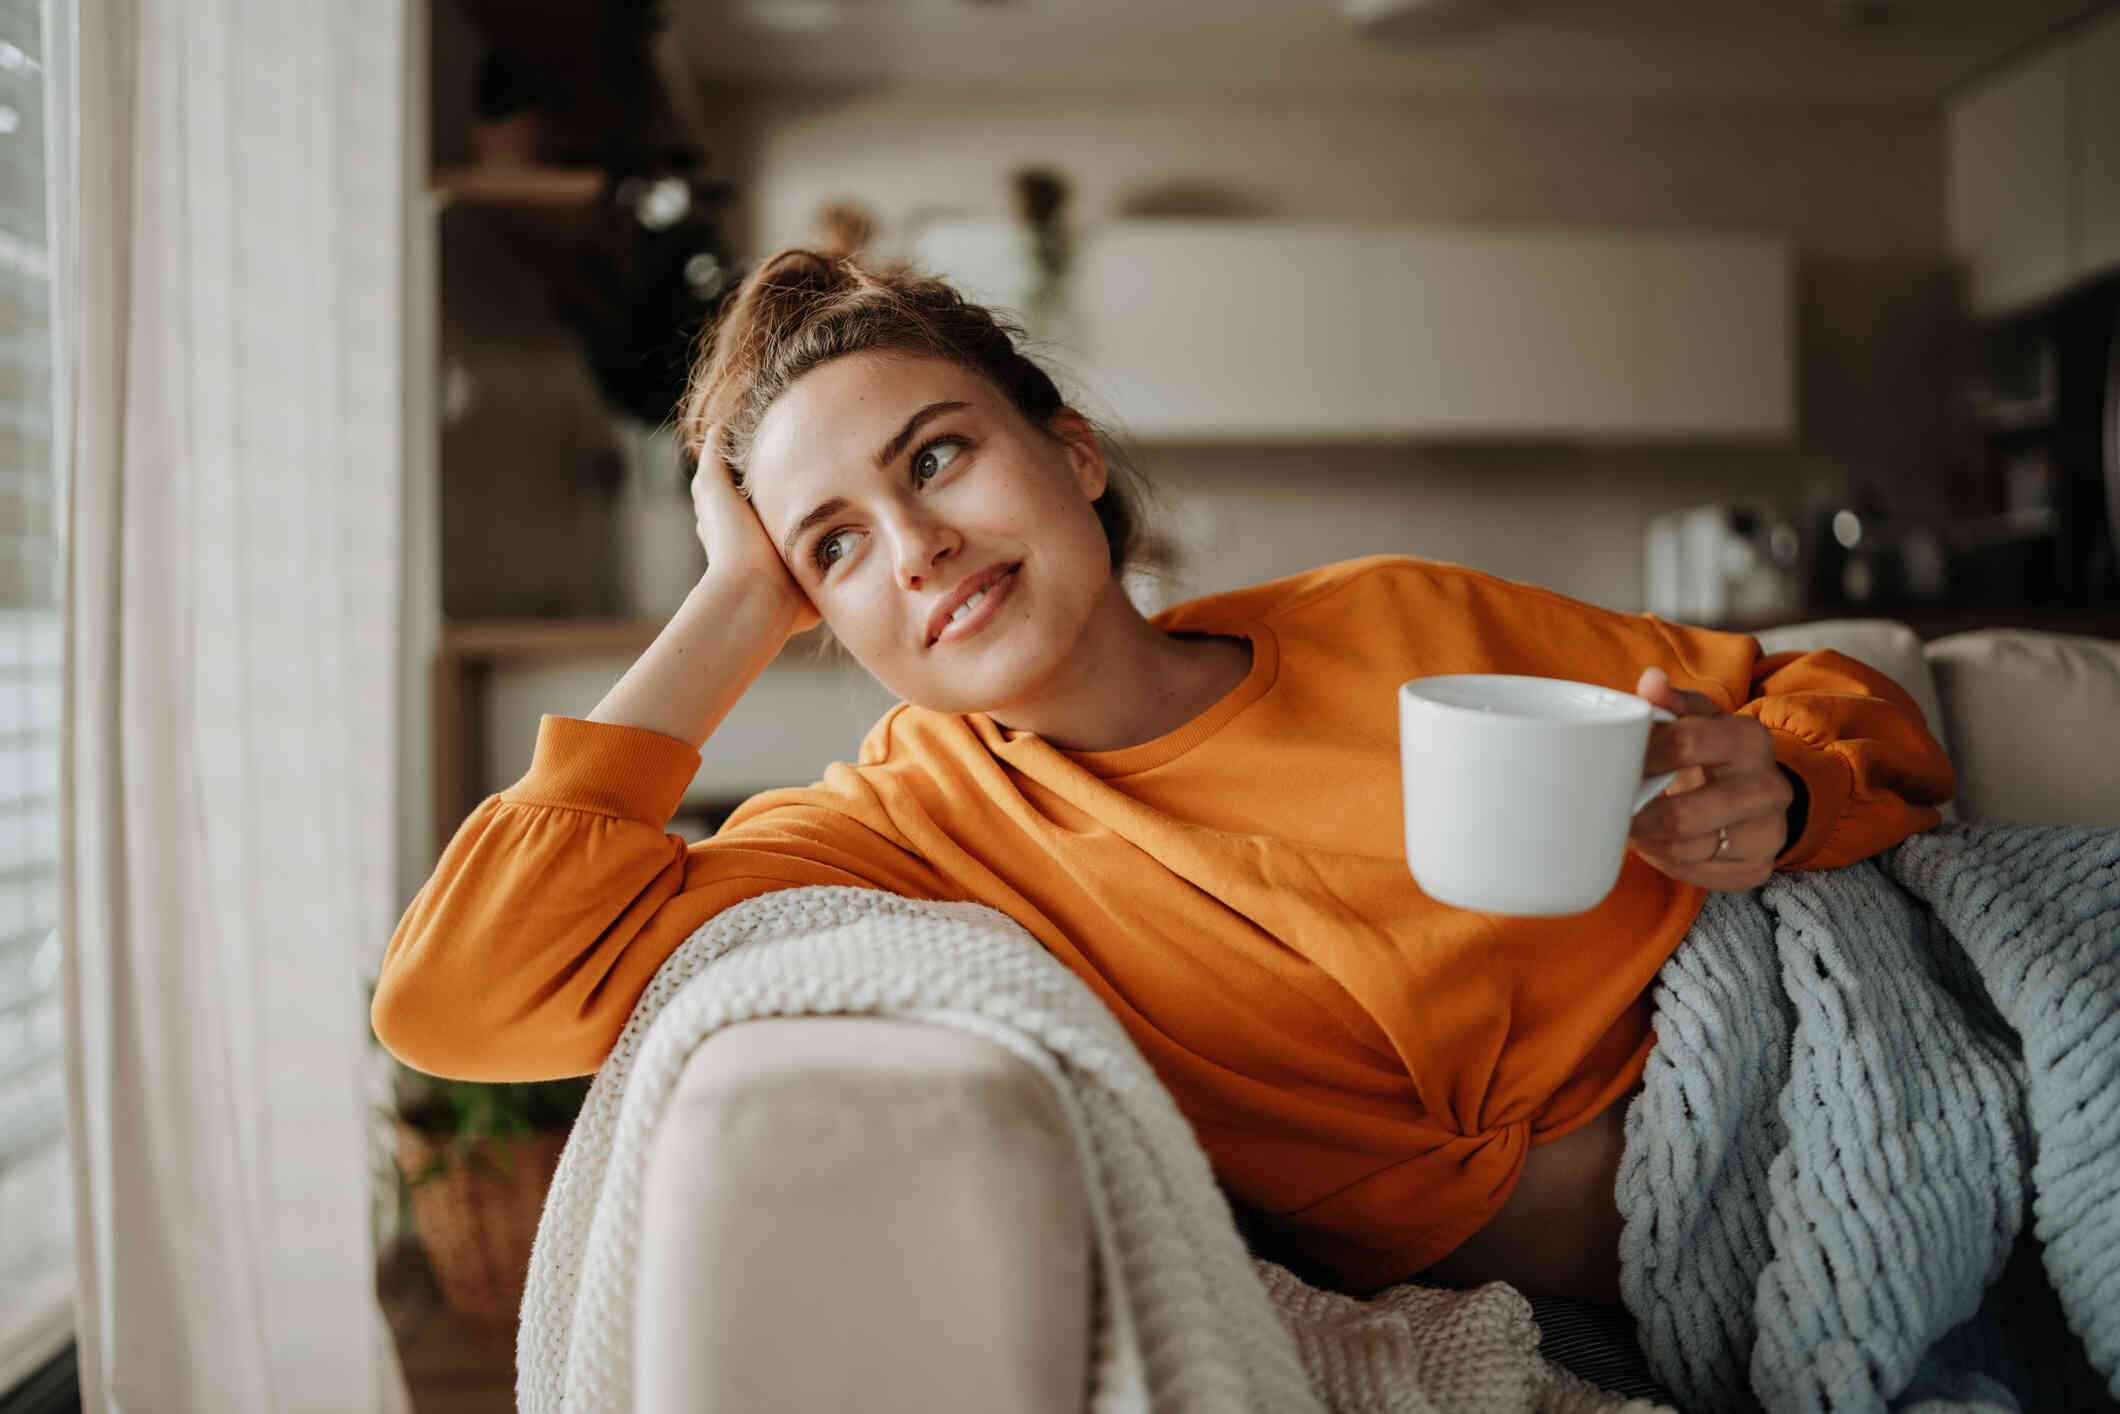 A woman in an orange shirt sits casually on her couch while leaning over the armrest and smiling as she holds a mug of coffee.